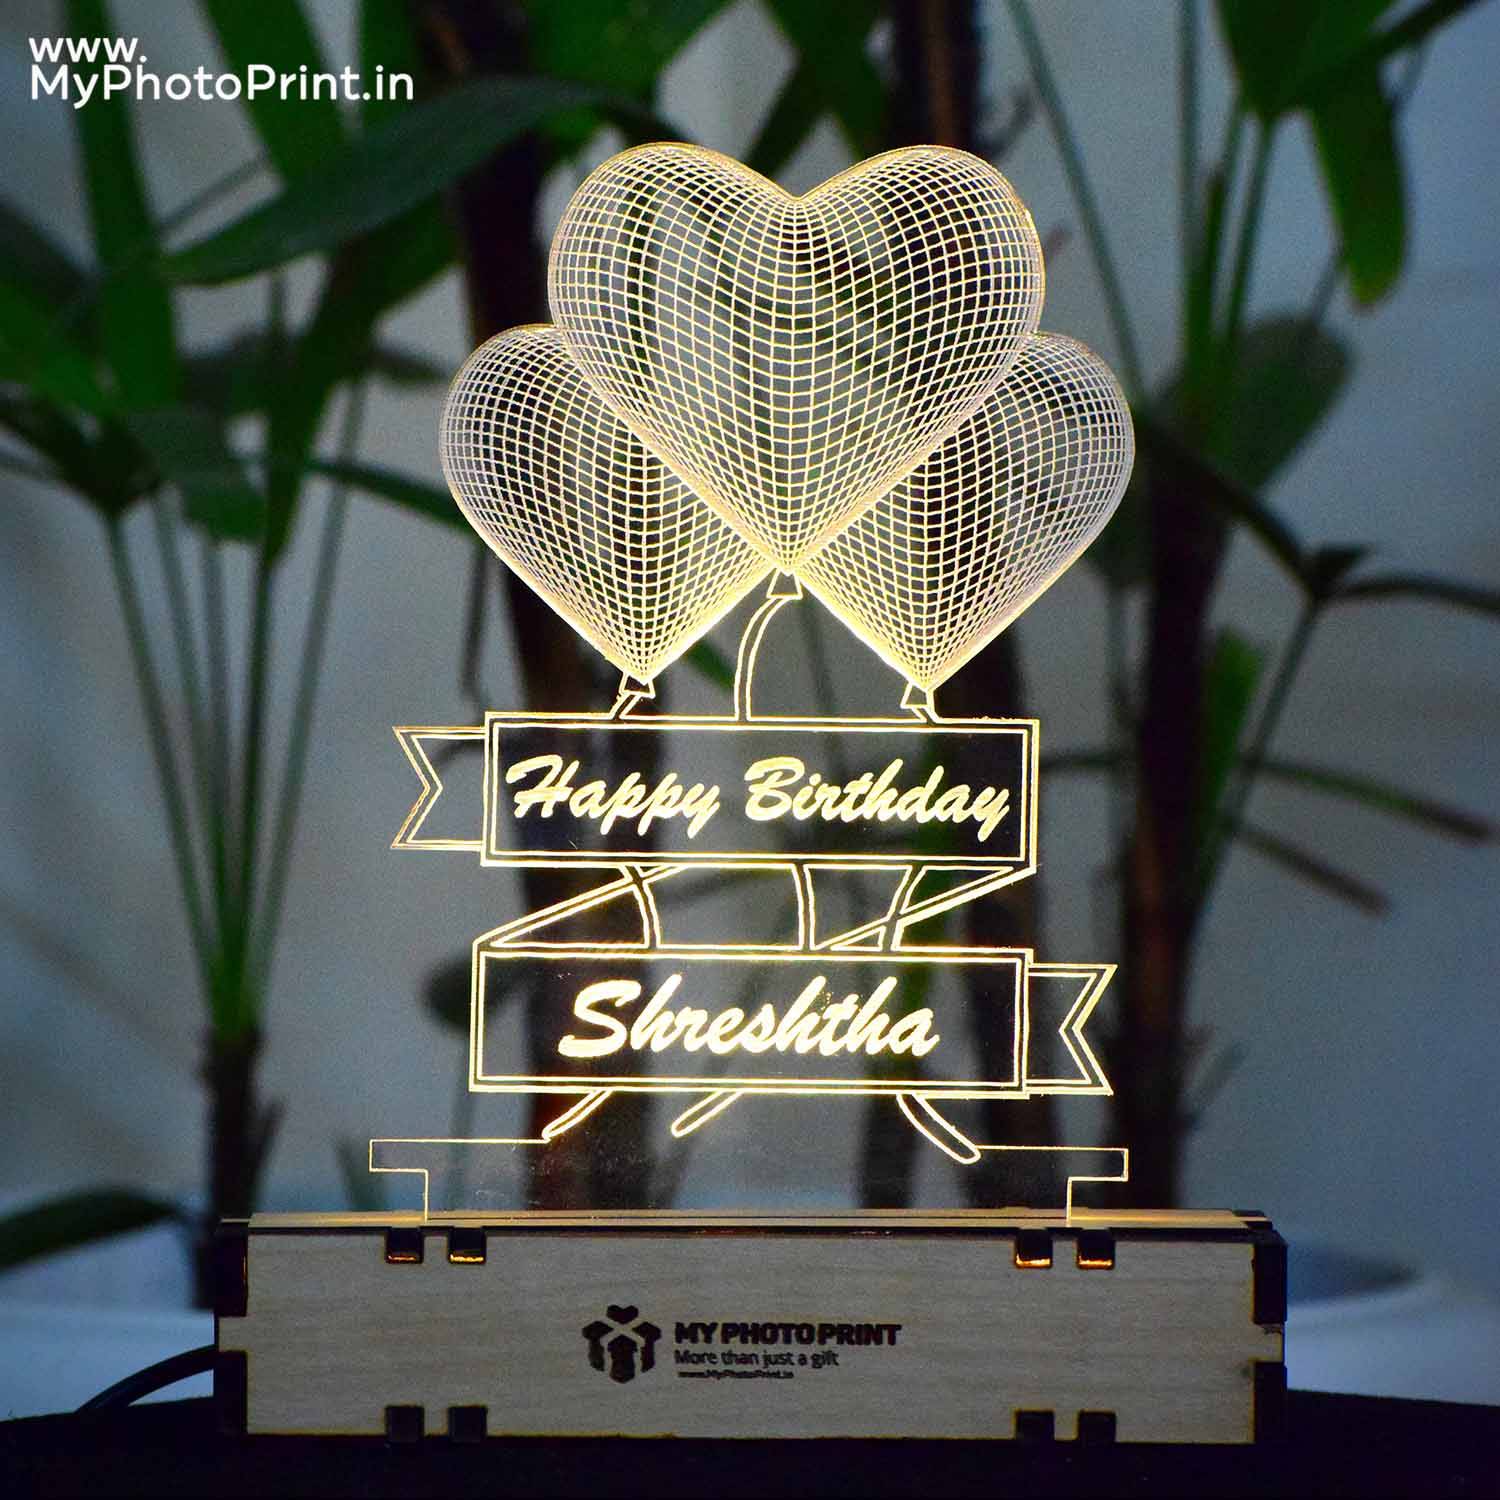 Buy Personalized 3D Illusion Lamp as Gifts for Her Custom Acrylic Online  in India  Etsy